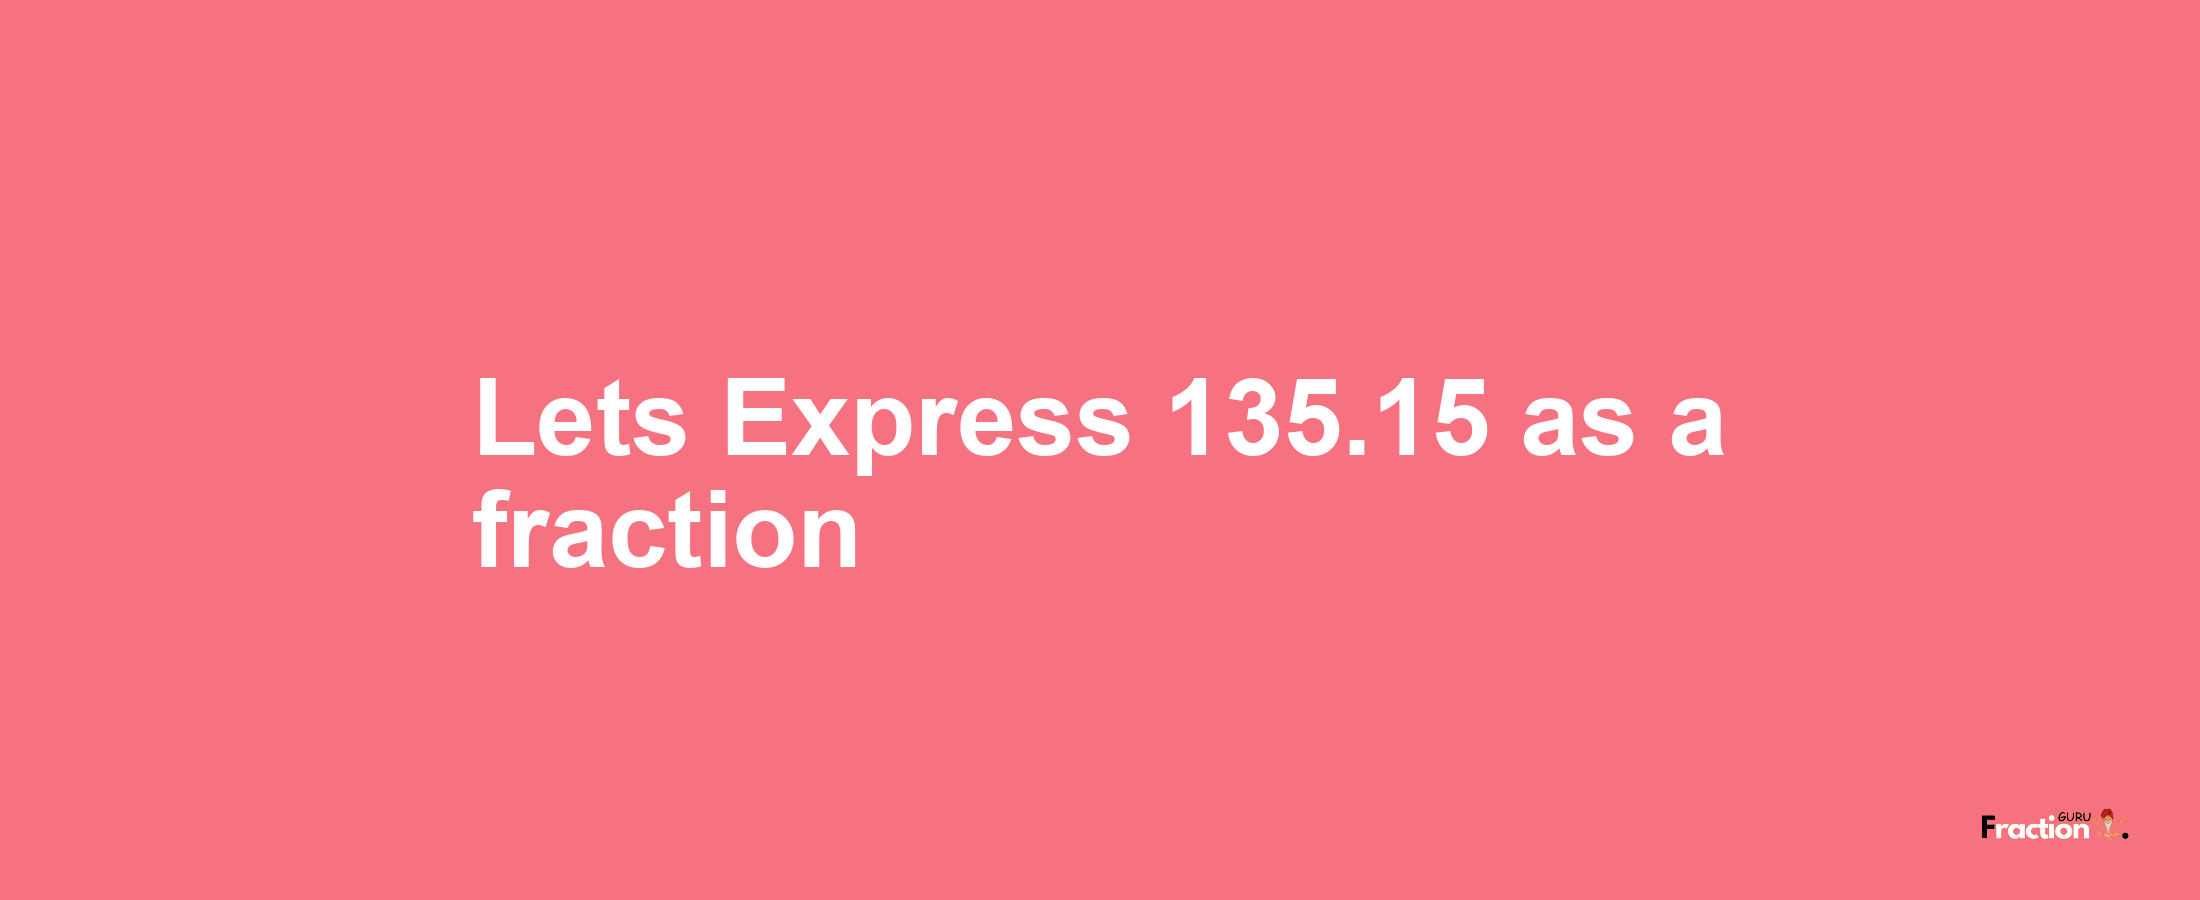 Lets Express 135.15 as afraction